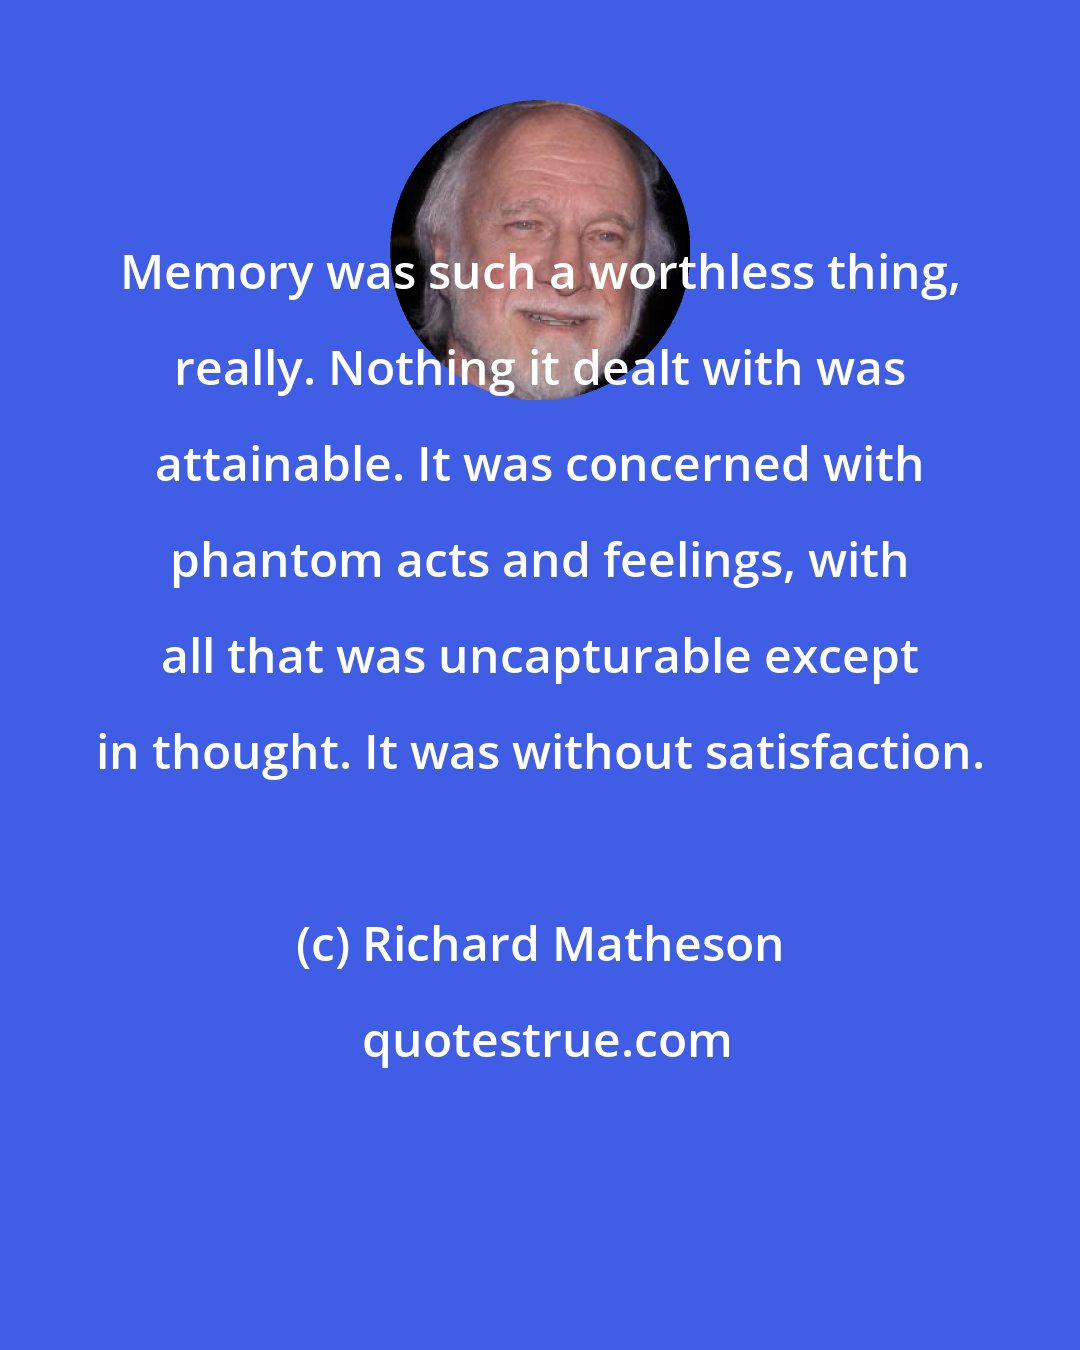 Richard Matheson: Memory was such a worthless thing, really. Nothing it dealt with was attainable. It was concerned with phantom acts and feelings, with all that was uncapturable except in thought. It was without satisfaction.